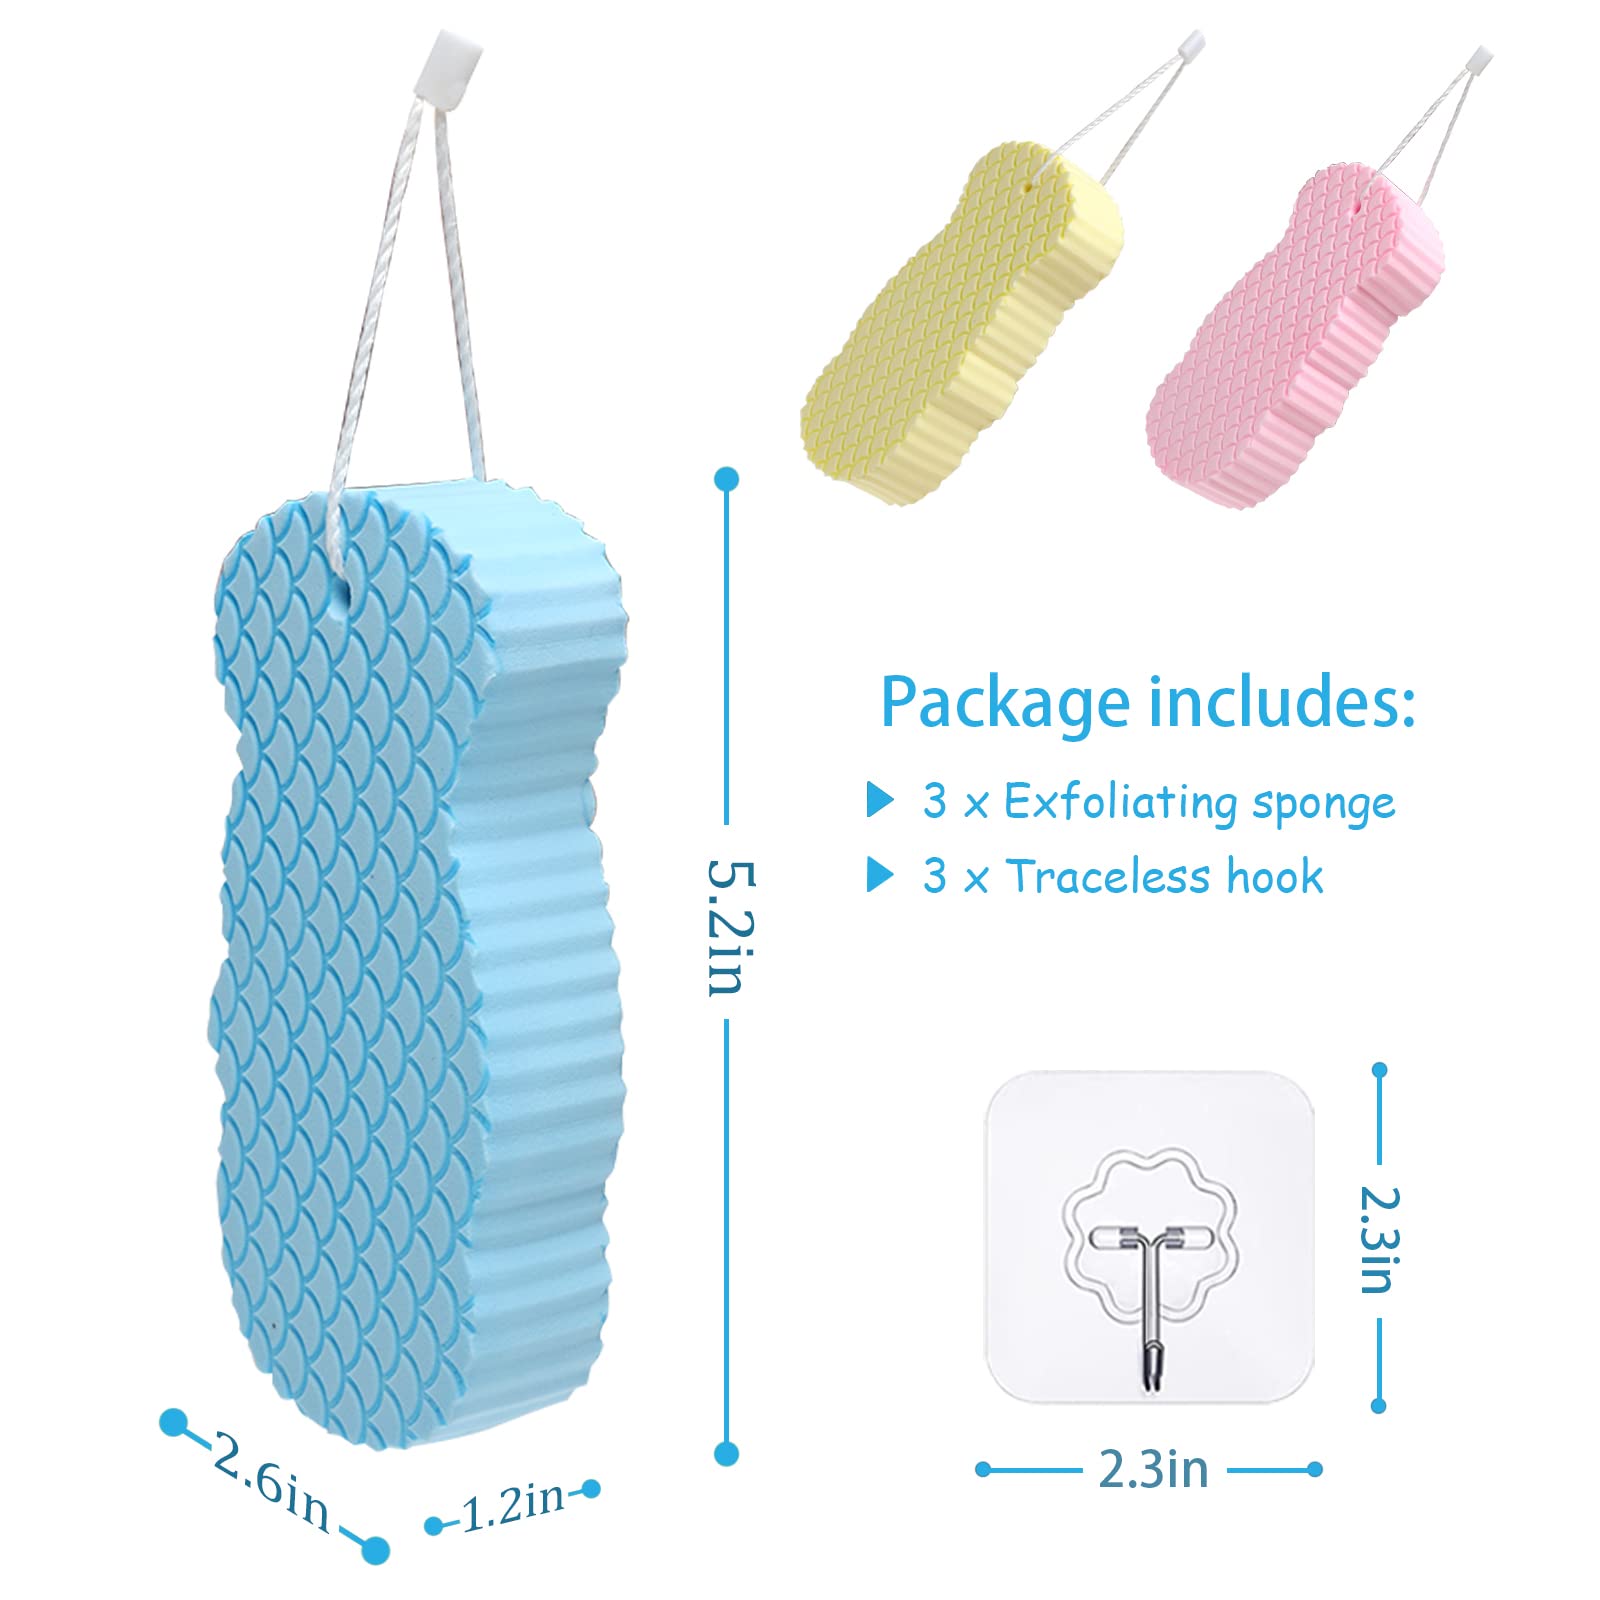 GFPGYQ 3Pcs Super Soft Exfoliating Bath Sponge, Resuable Painless 3D Exfoliating Dead Skin Body Sponge with 3 Sticky Hooks, for Adults Men Children and Pregnant Women